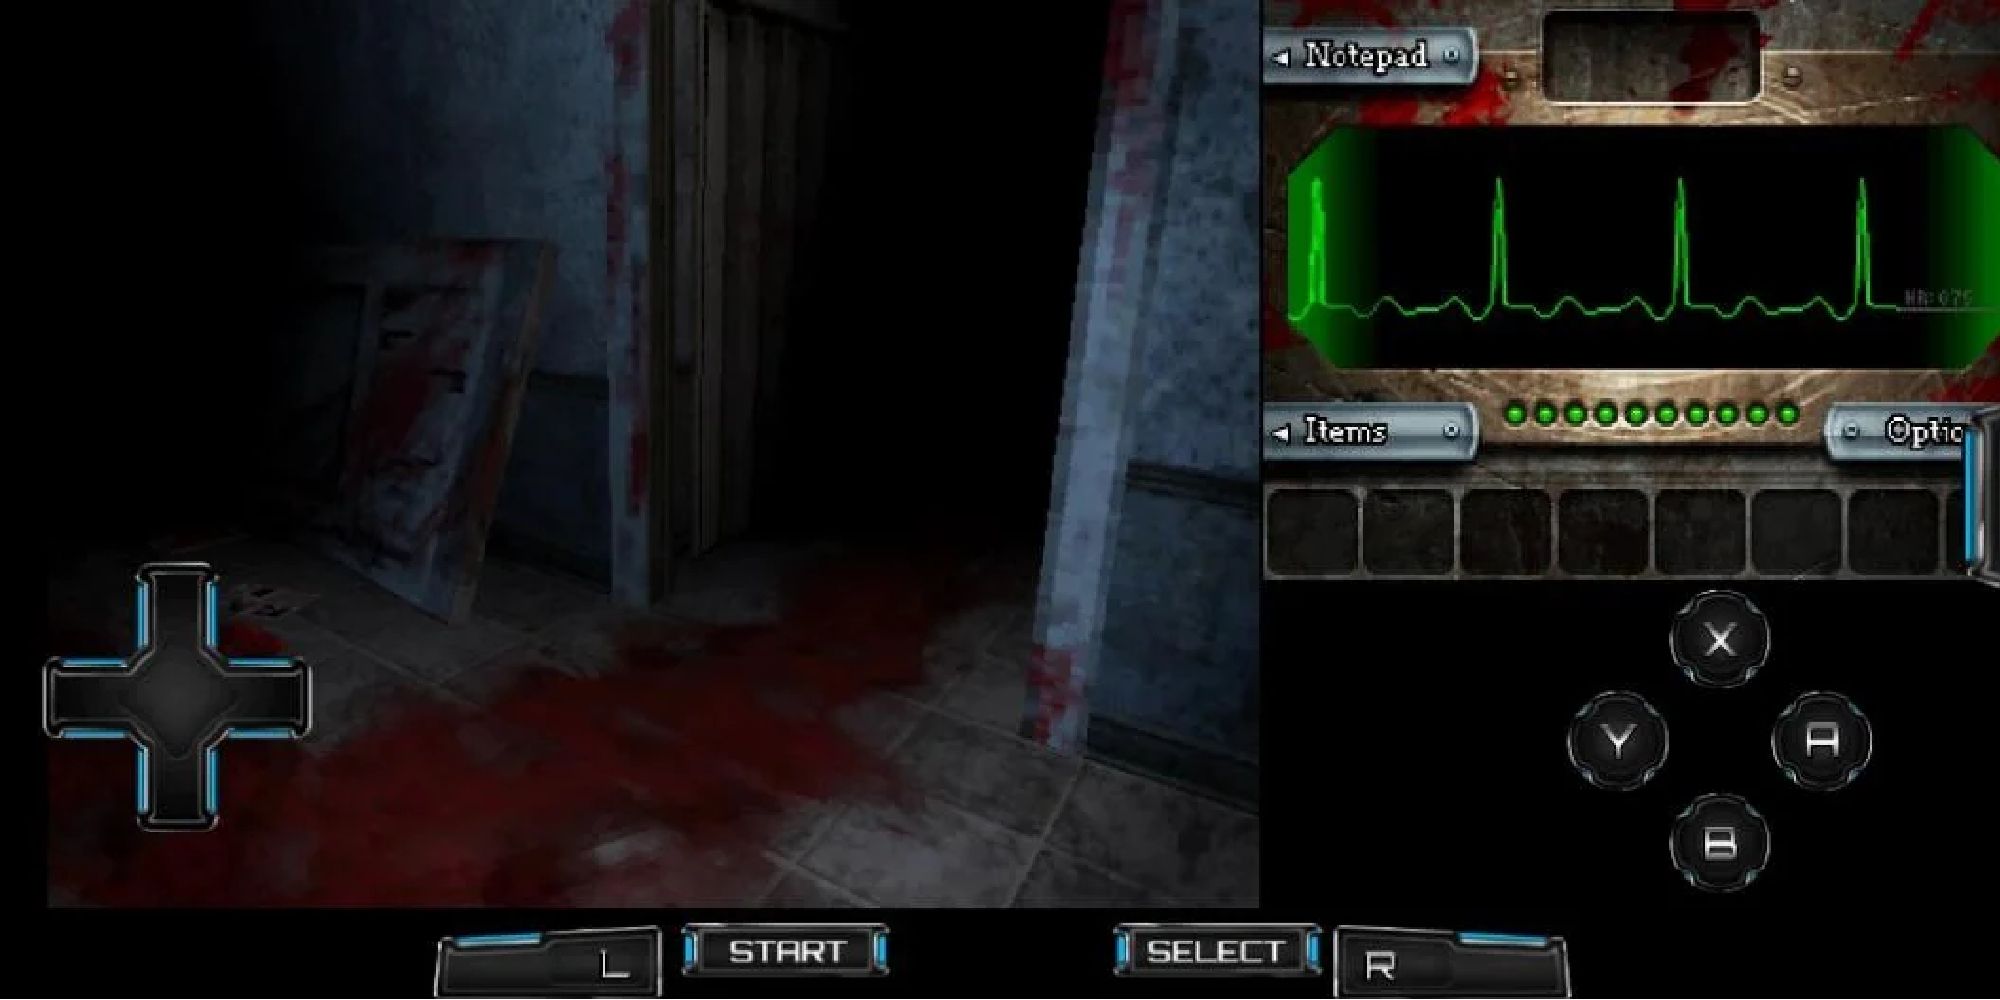 An image showing a bloody, dark corridor, as well as a UI showing an inventory, health bar, and control buttons.